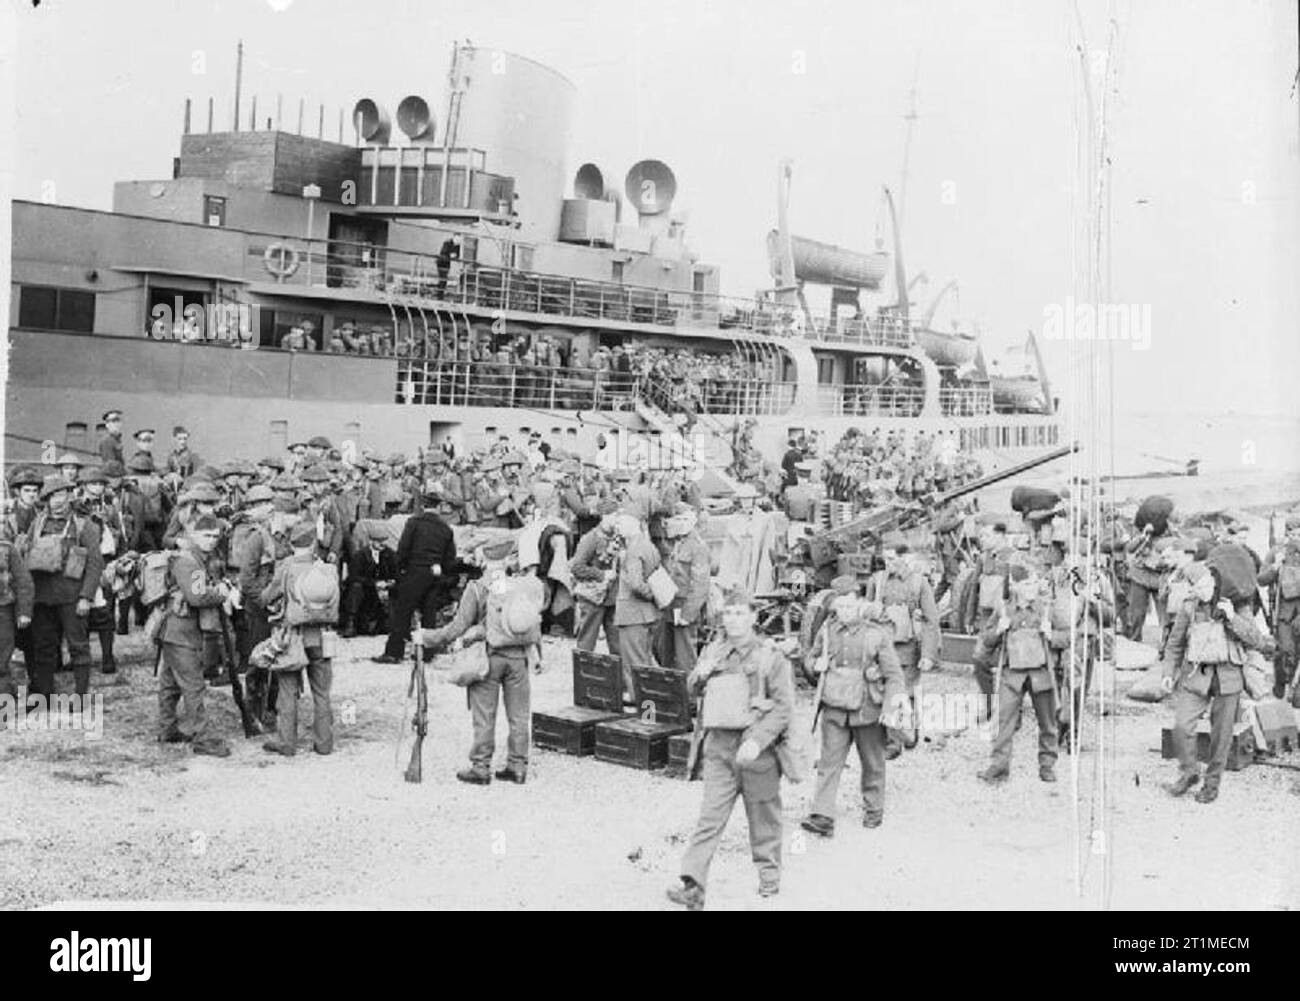 The British Expeditionary Force (bef) in France 1939-1940 The BEF arrives in France, September - October 1939: Men of the 2nd Battalion, Royal Inniskilling Fusiliers disembark from the former passenger ferry ROYAL SOVEREIGN at Cherbourg. Stock Photo